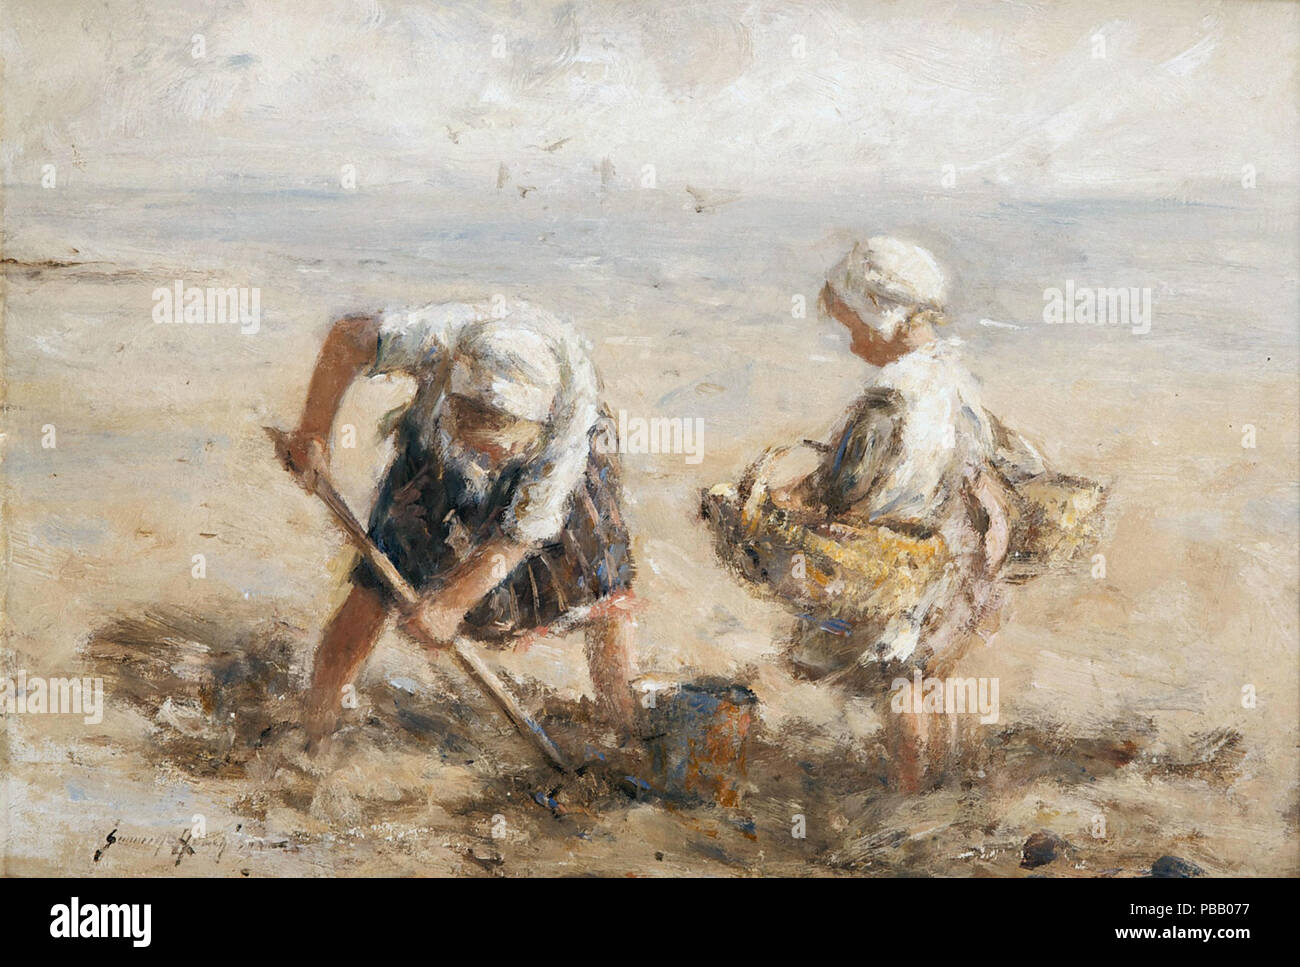 Hutchison  Robert Gemmell - Dig in the Sand Stock Photo